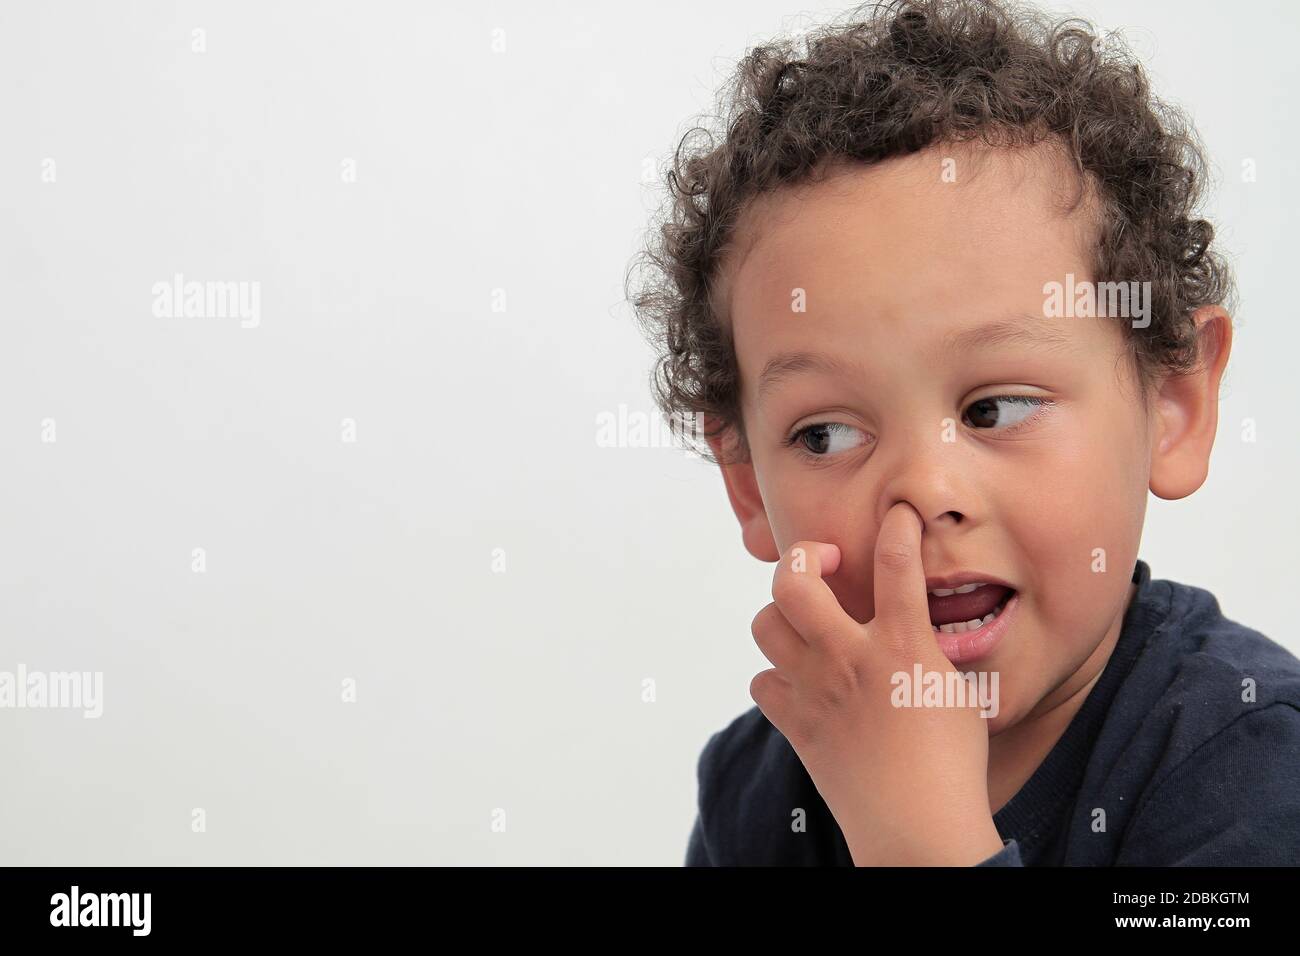 boy picking his nose with white background stock photo Stock Photo